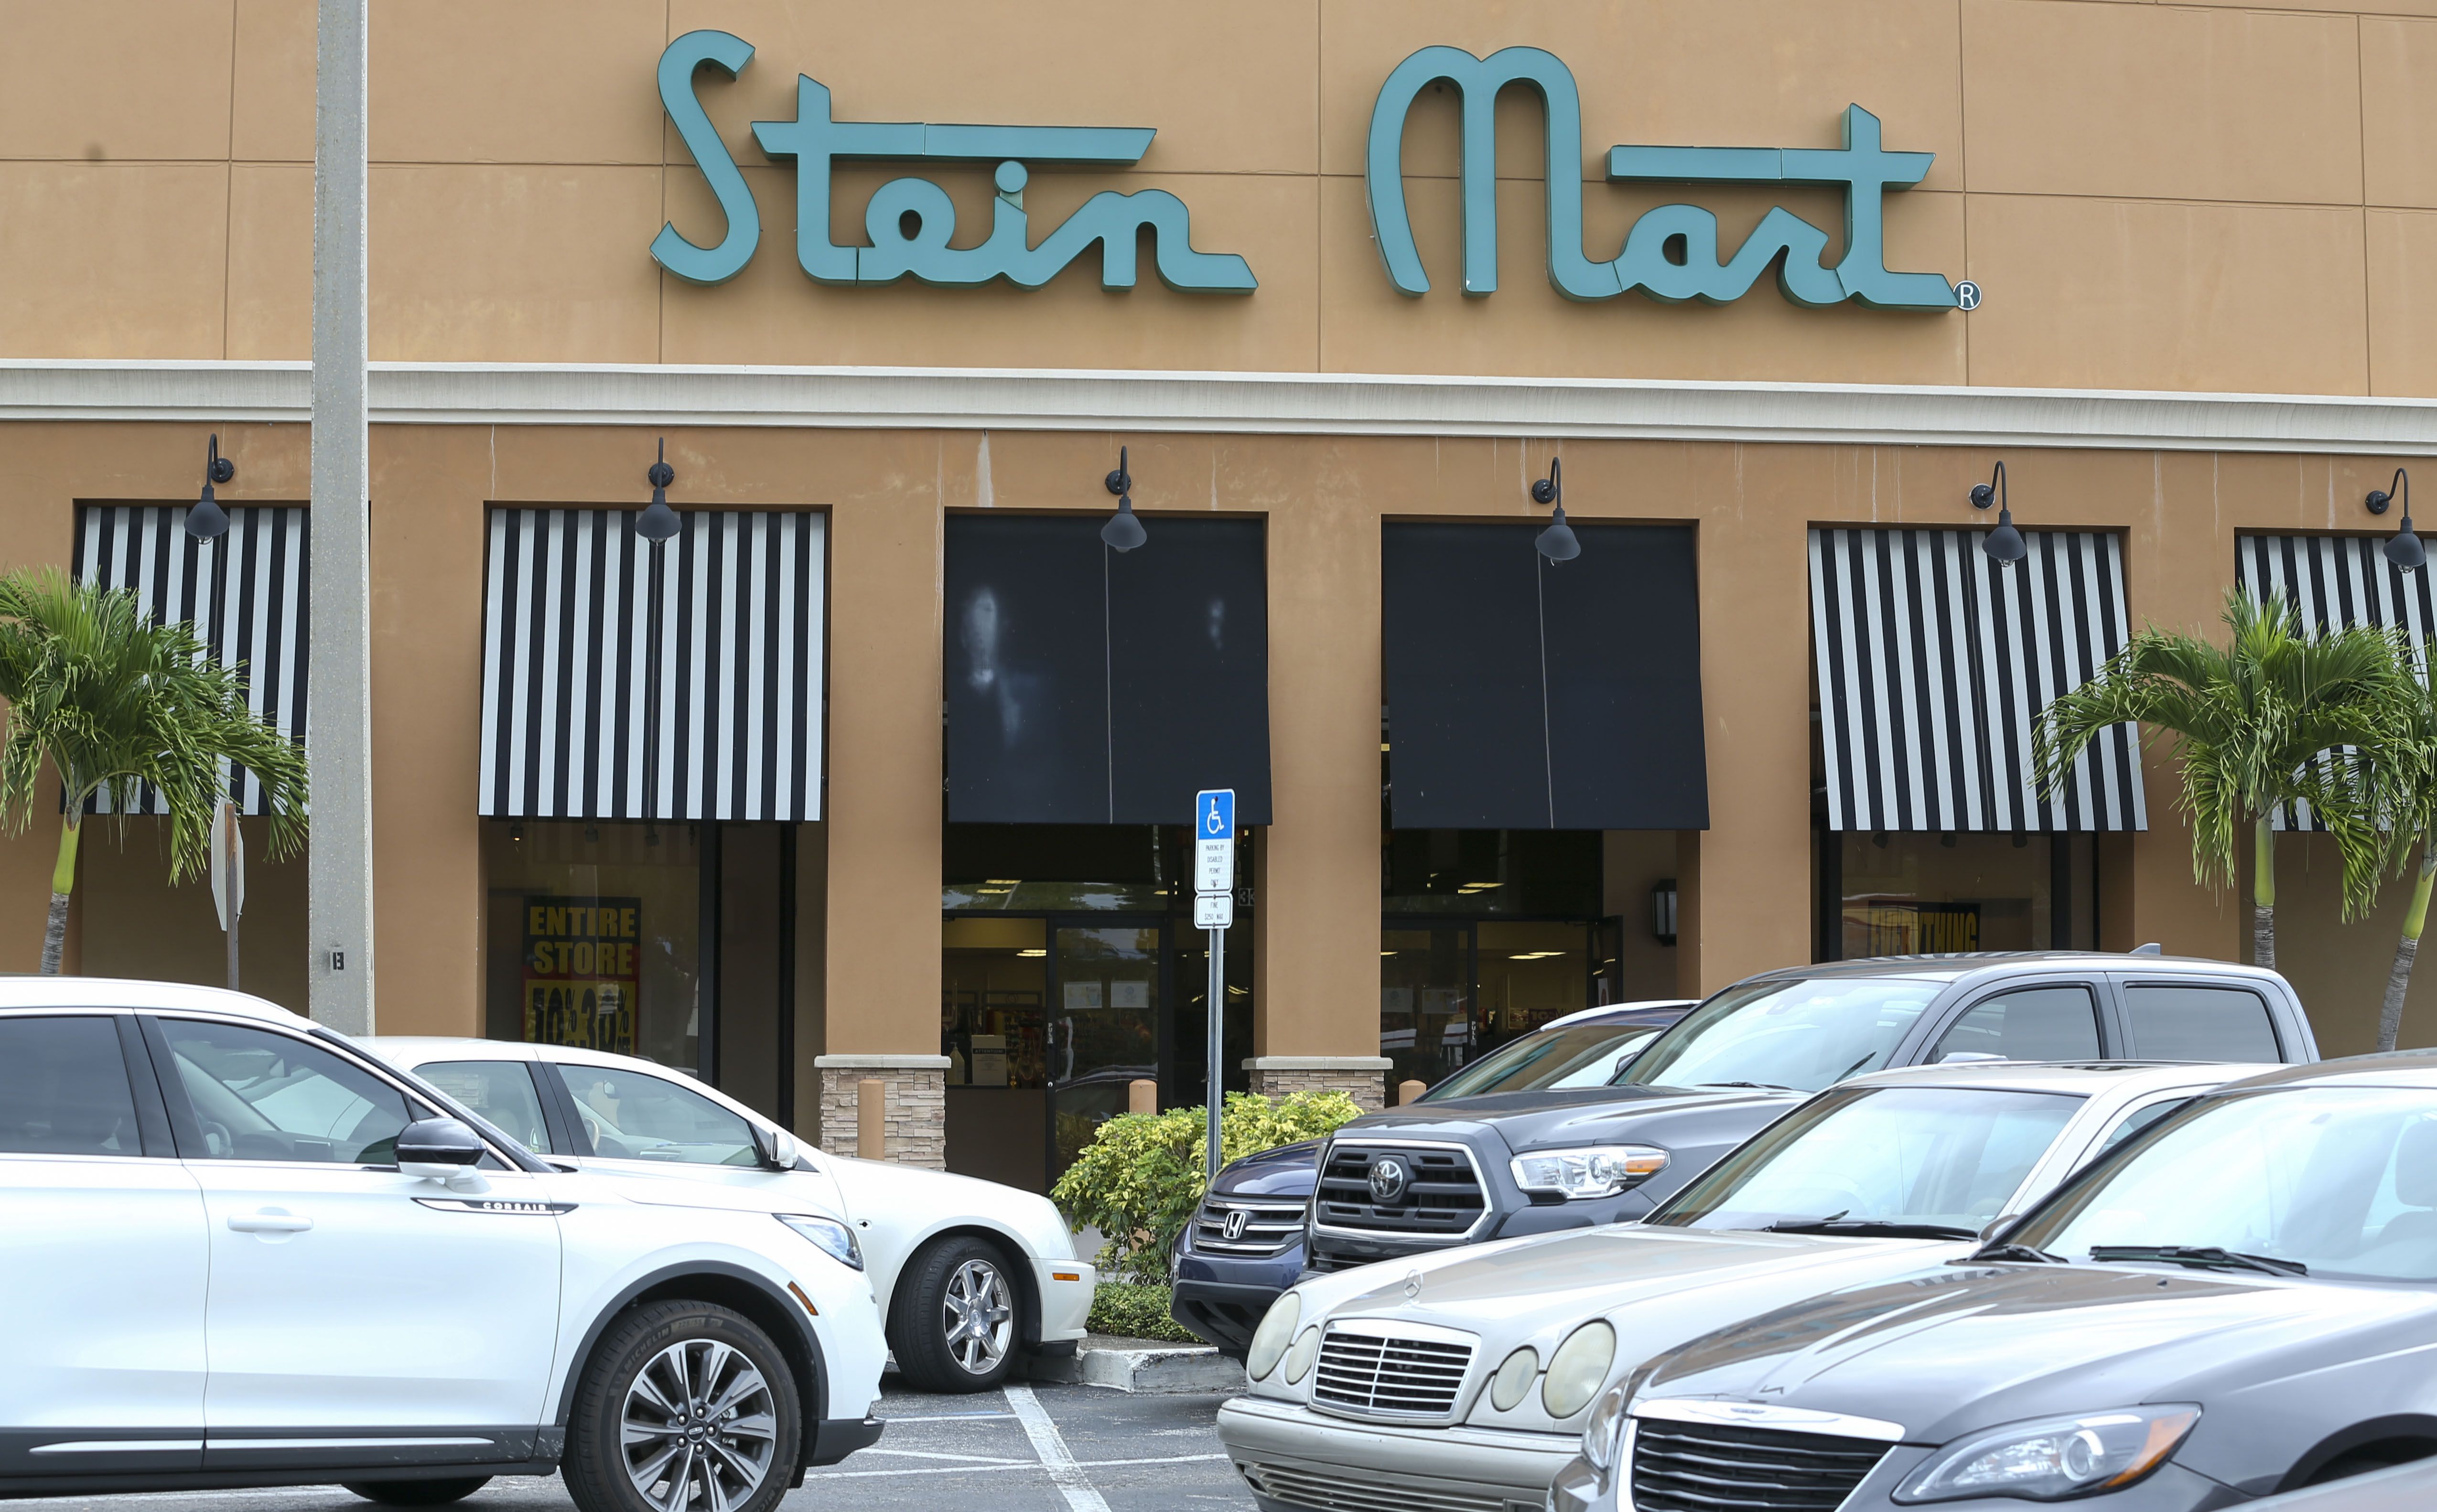 Corpus Christi's Stein Mart store could be among those set to close